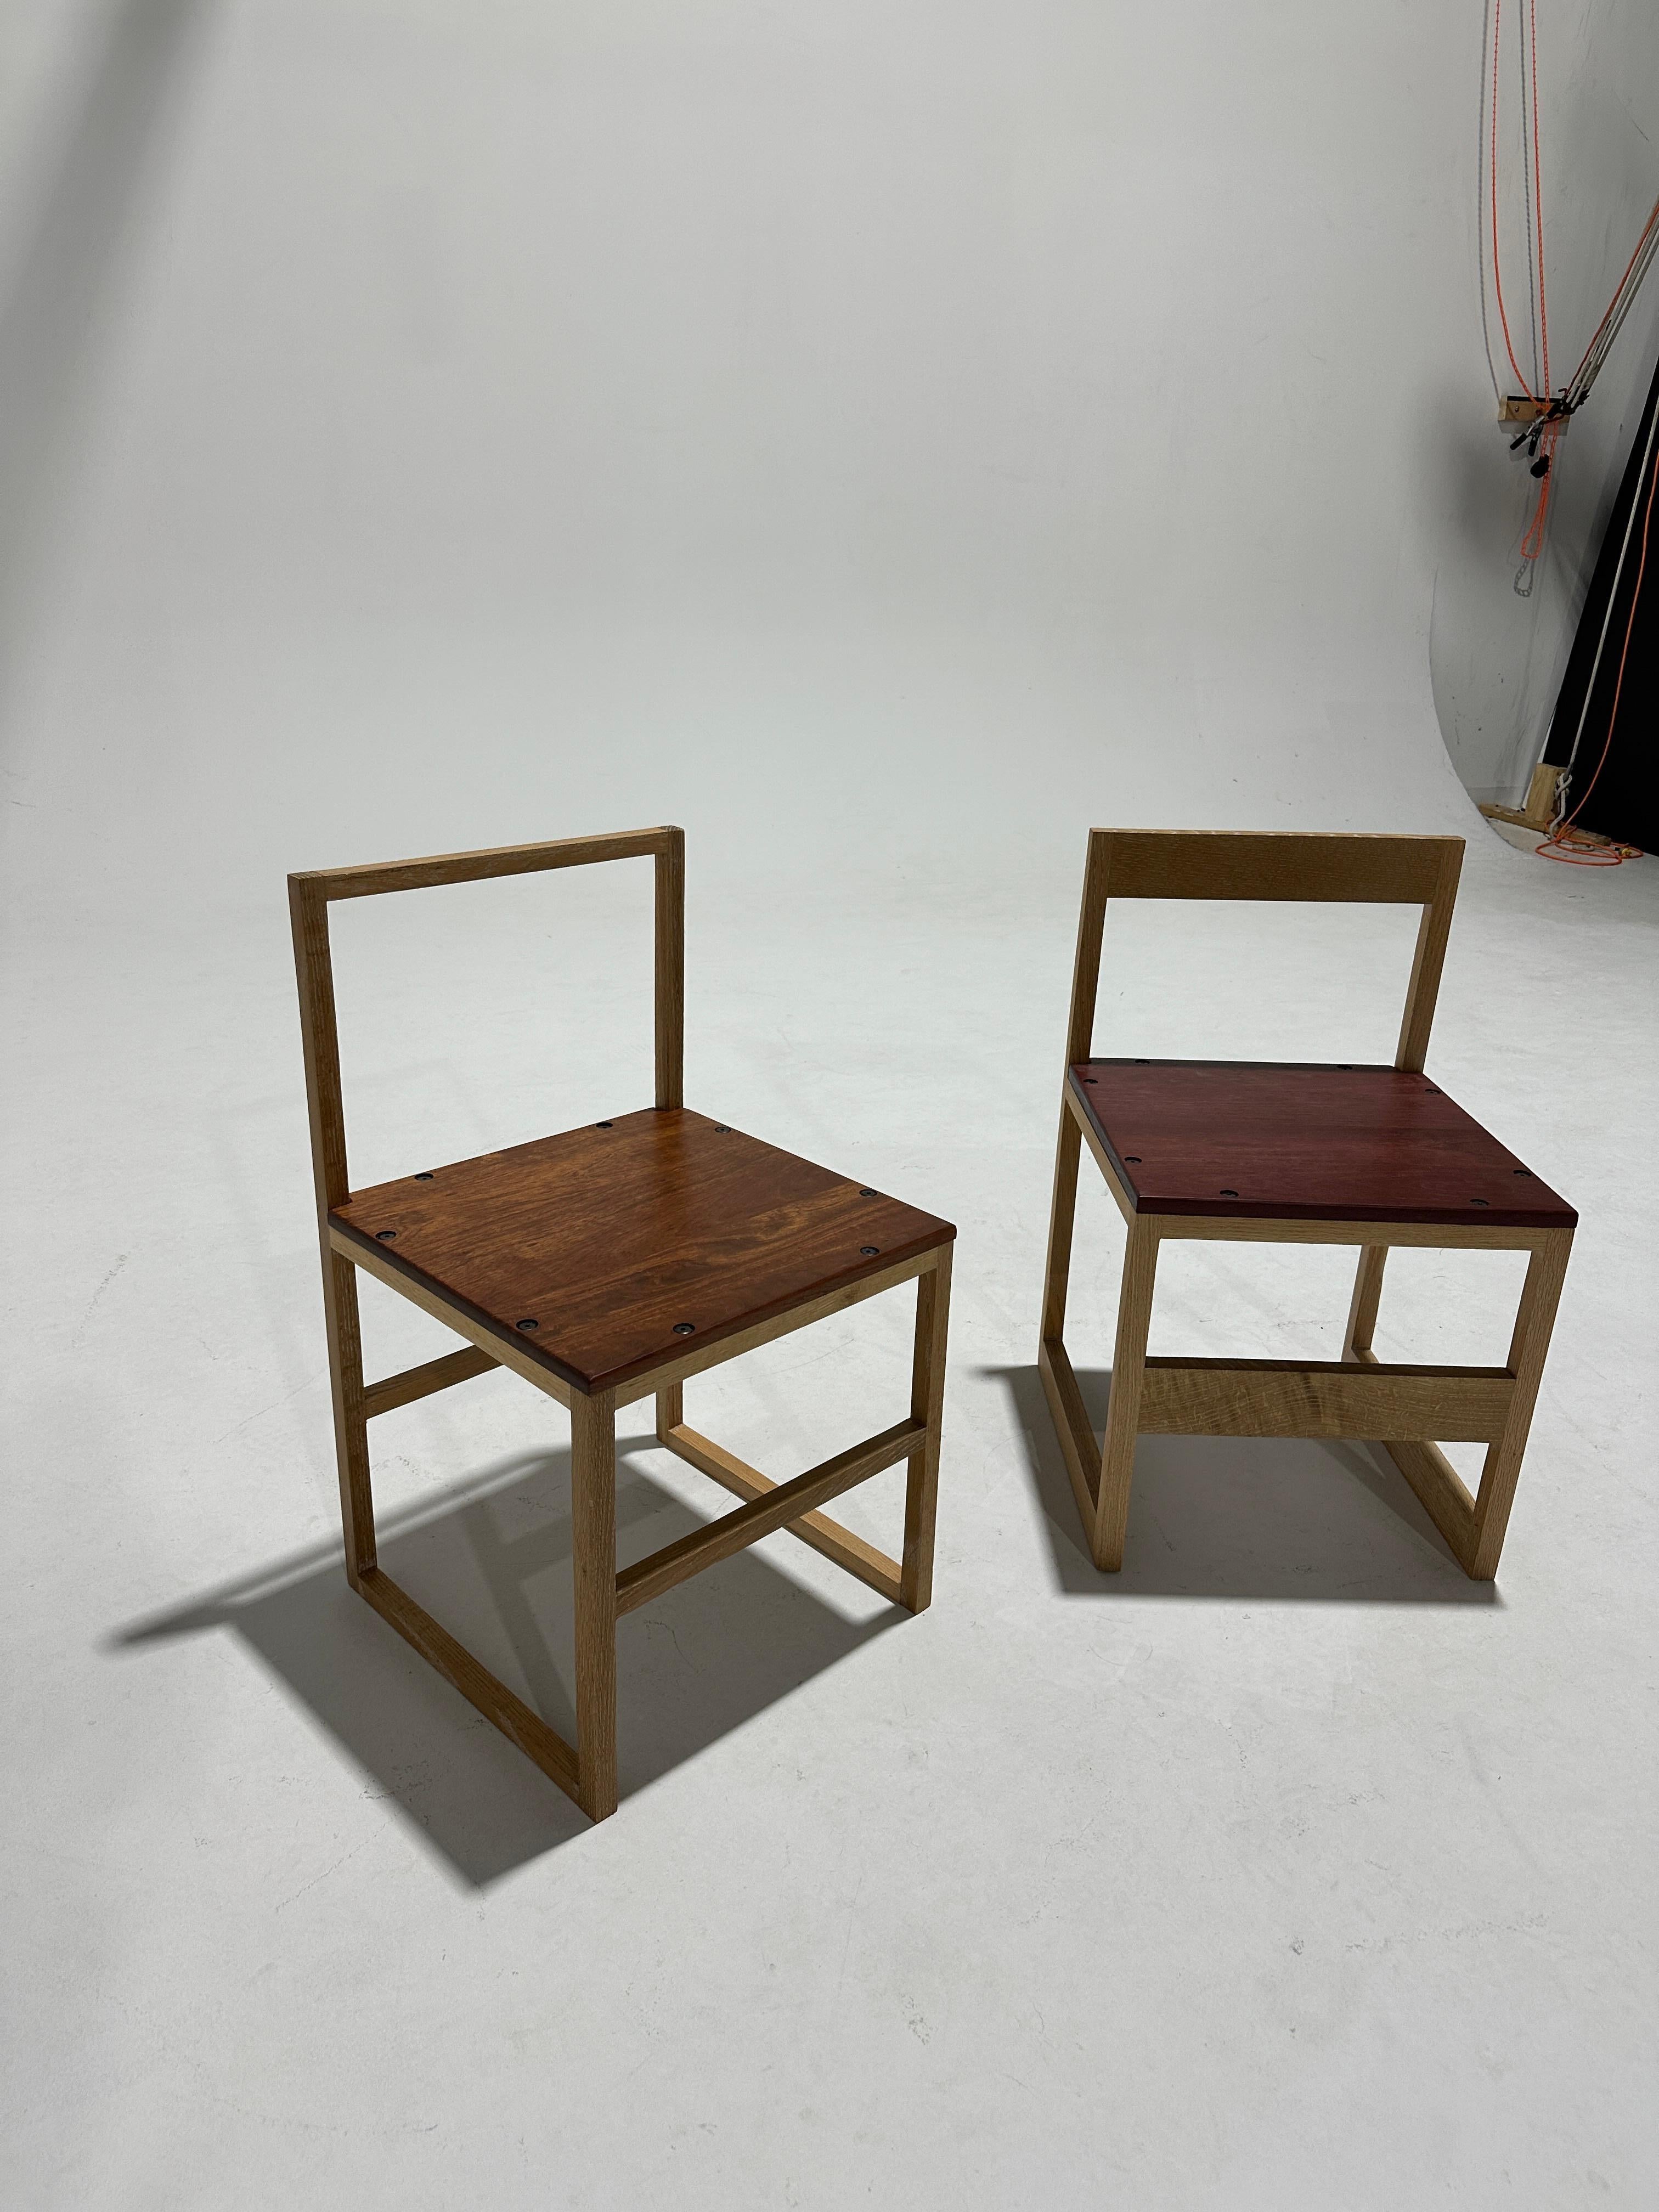 Mayfly Studio - American Craft White Oak Side Chairs In Excellent Condition For Sale In Alpha, NJ